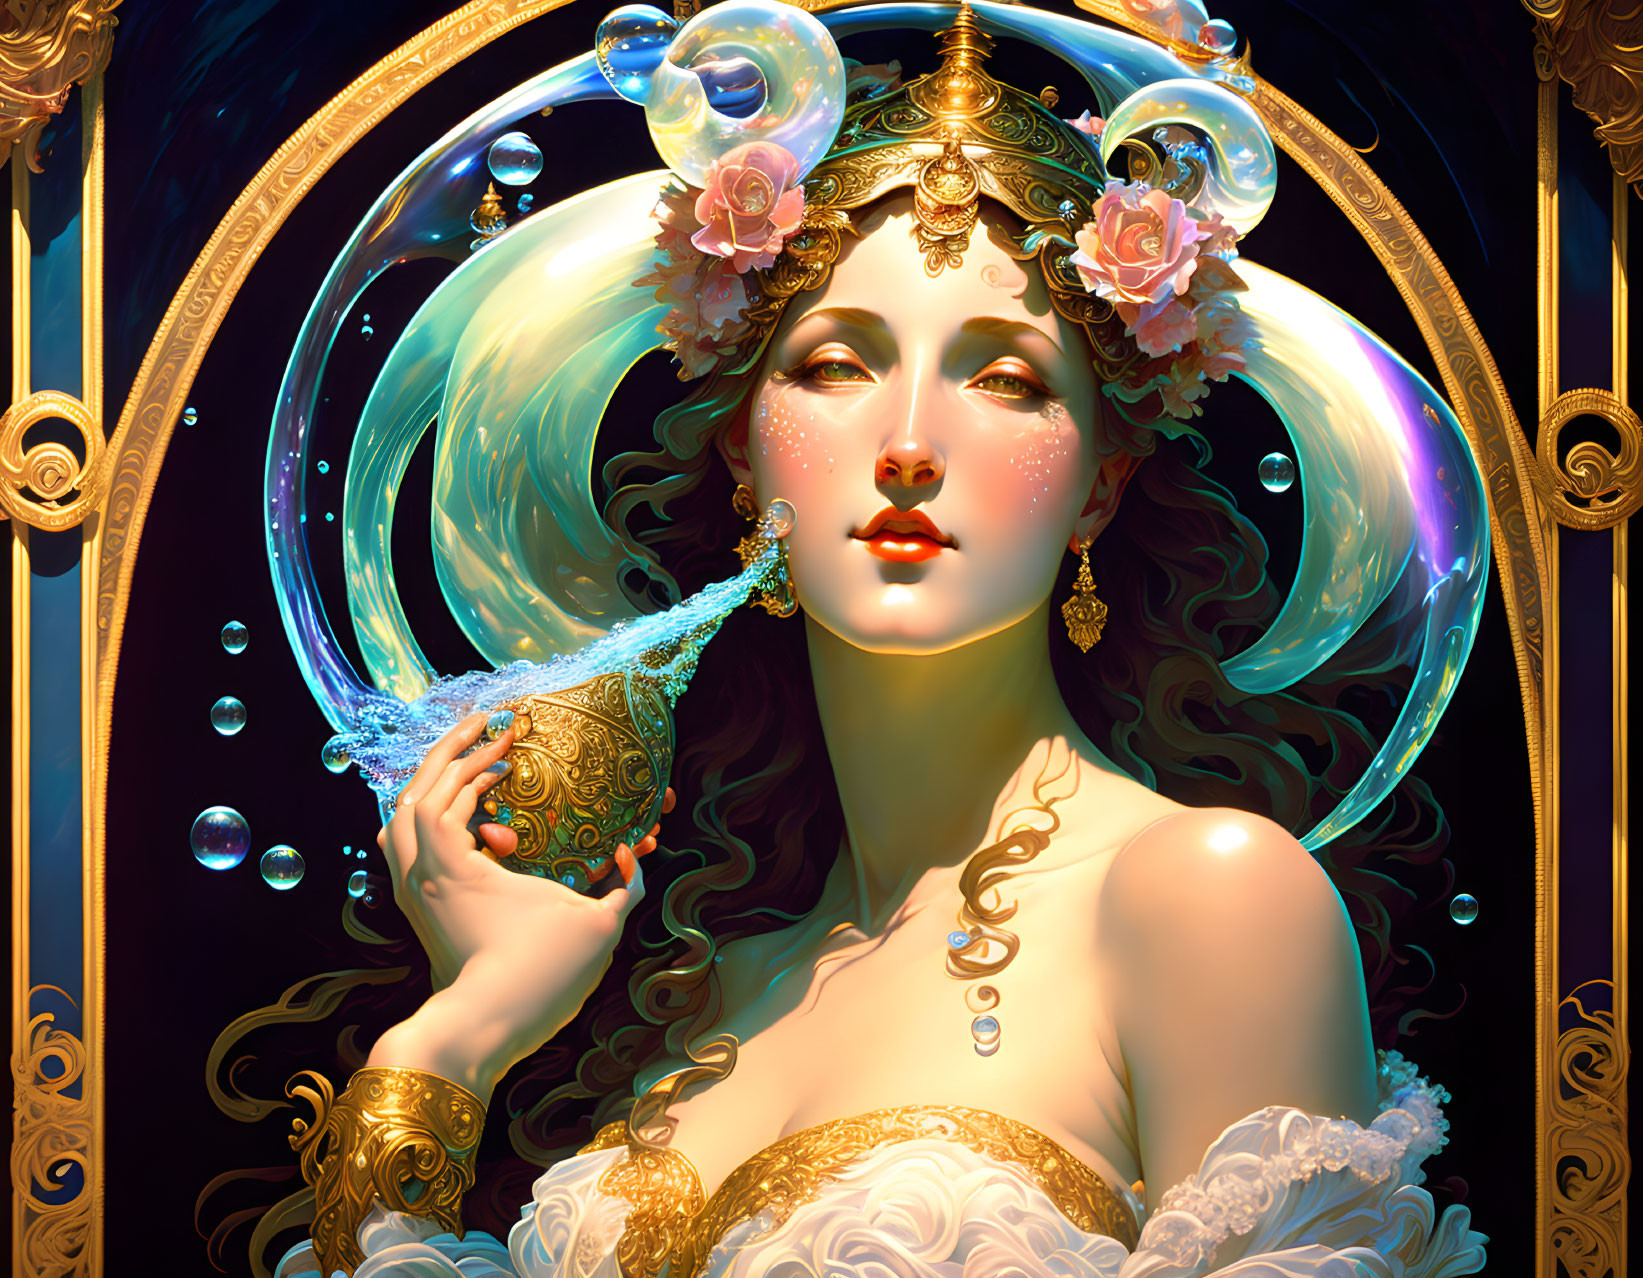 Ethereal woman with ornate headdress and glowing orb surrounded by bubbles